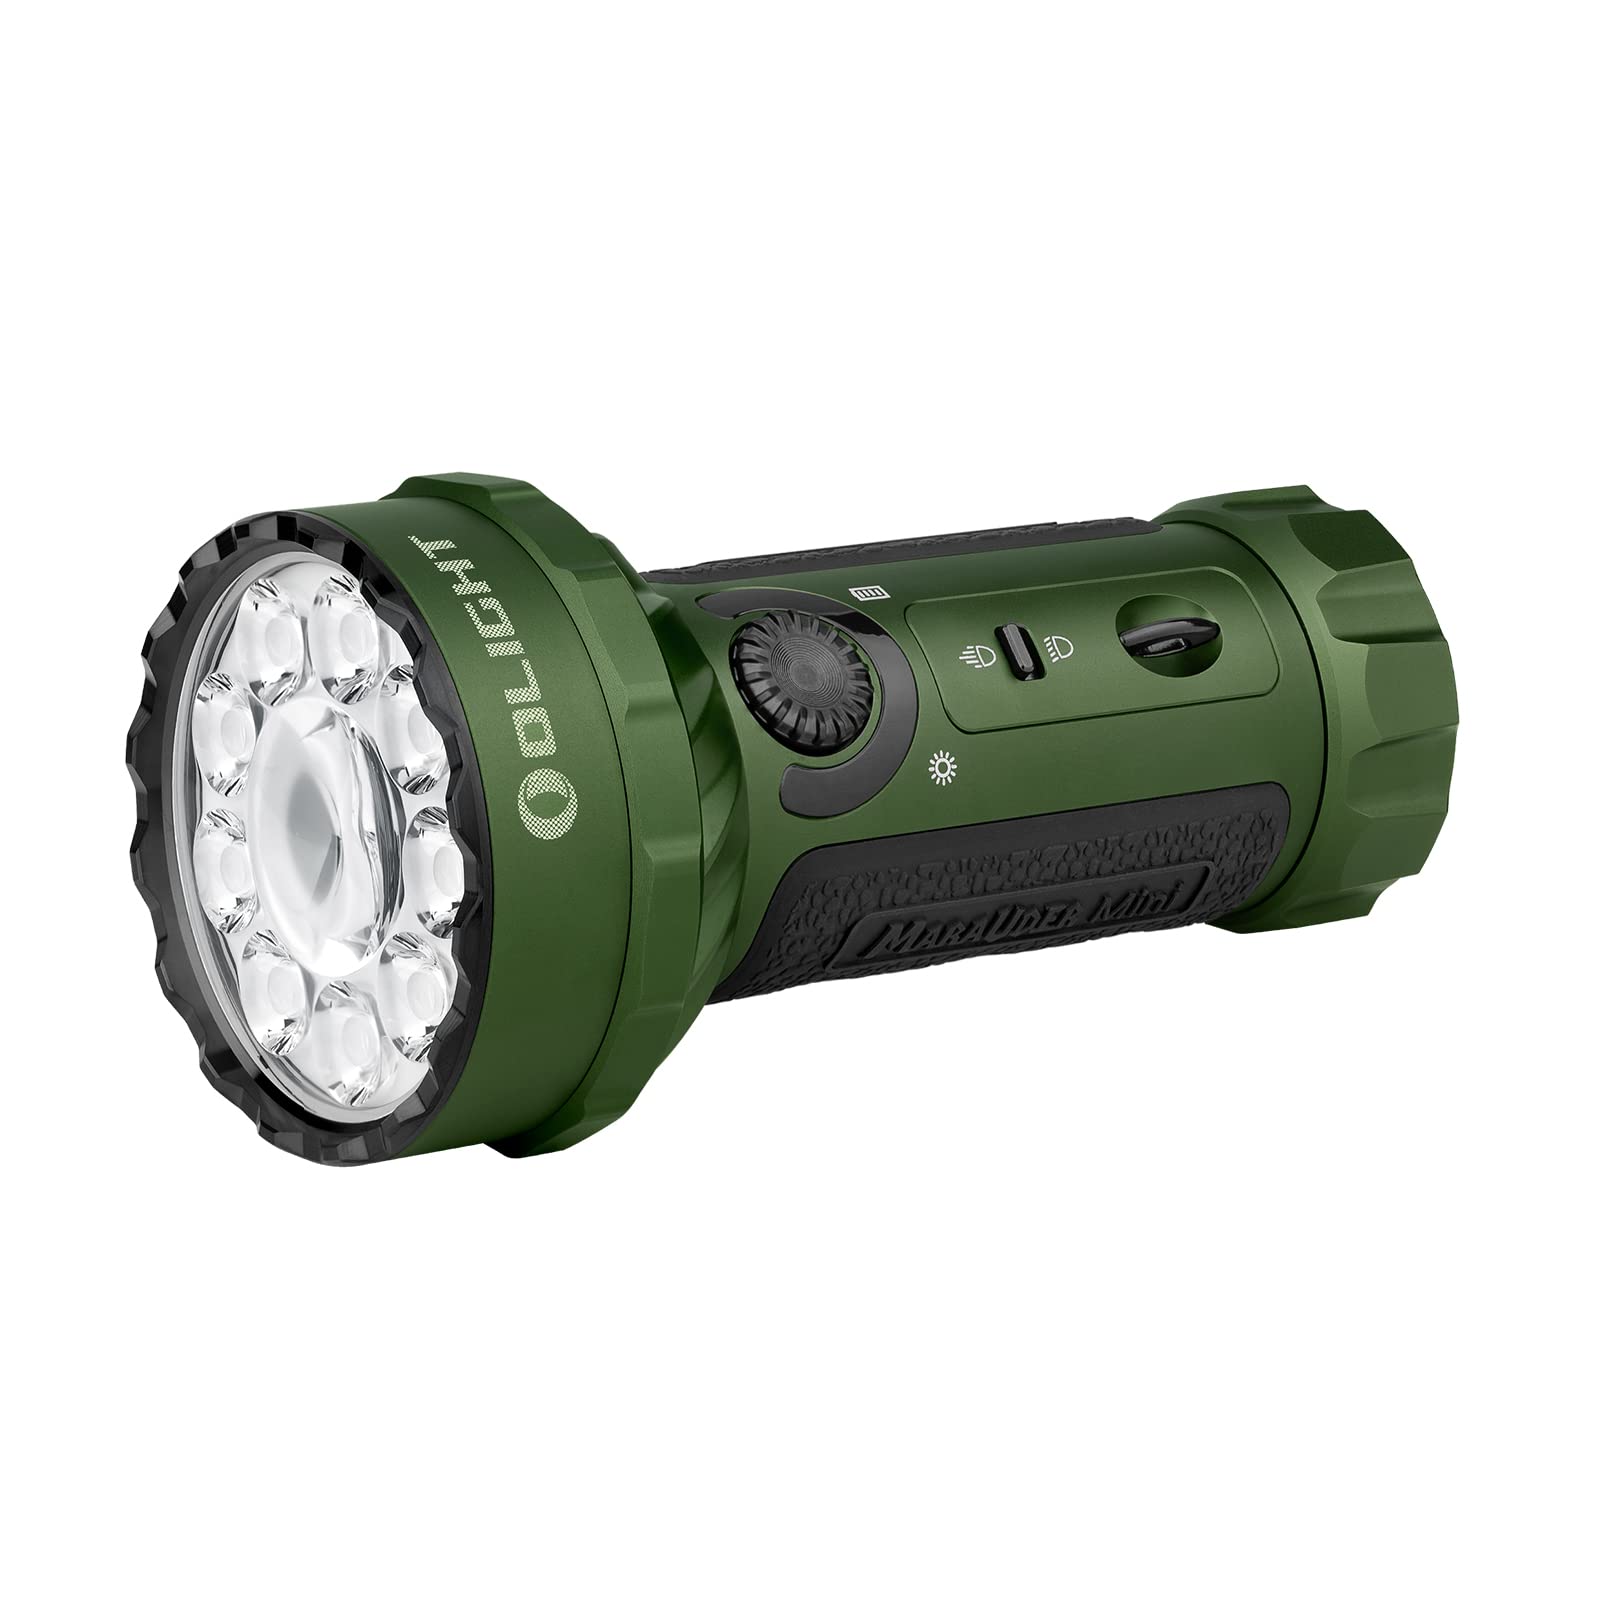 Olight Marauder Mini 7,000 Lumens Bright Flashlight with 600 Meters Beam Distance, Powerful RGB Flashights, Rechargeable MCC3 Magnetic Charging for Outdoor, Hunting, Searching